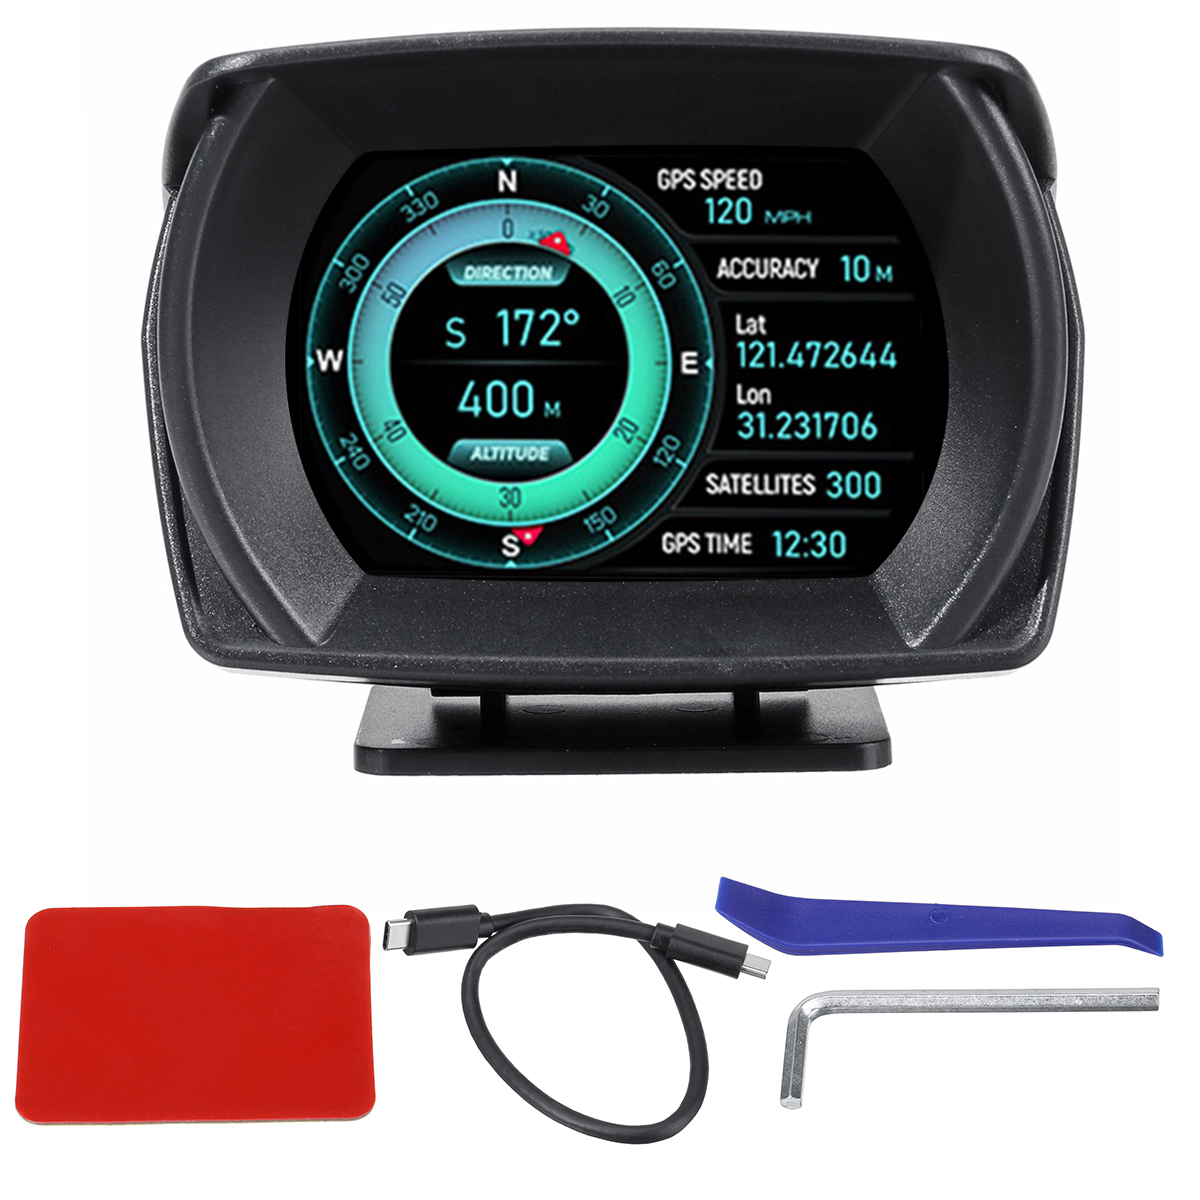 HUD Head-Up Display LCD OBD + GPS Dual System Trip Computer Driving Speedometer